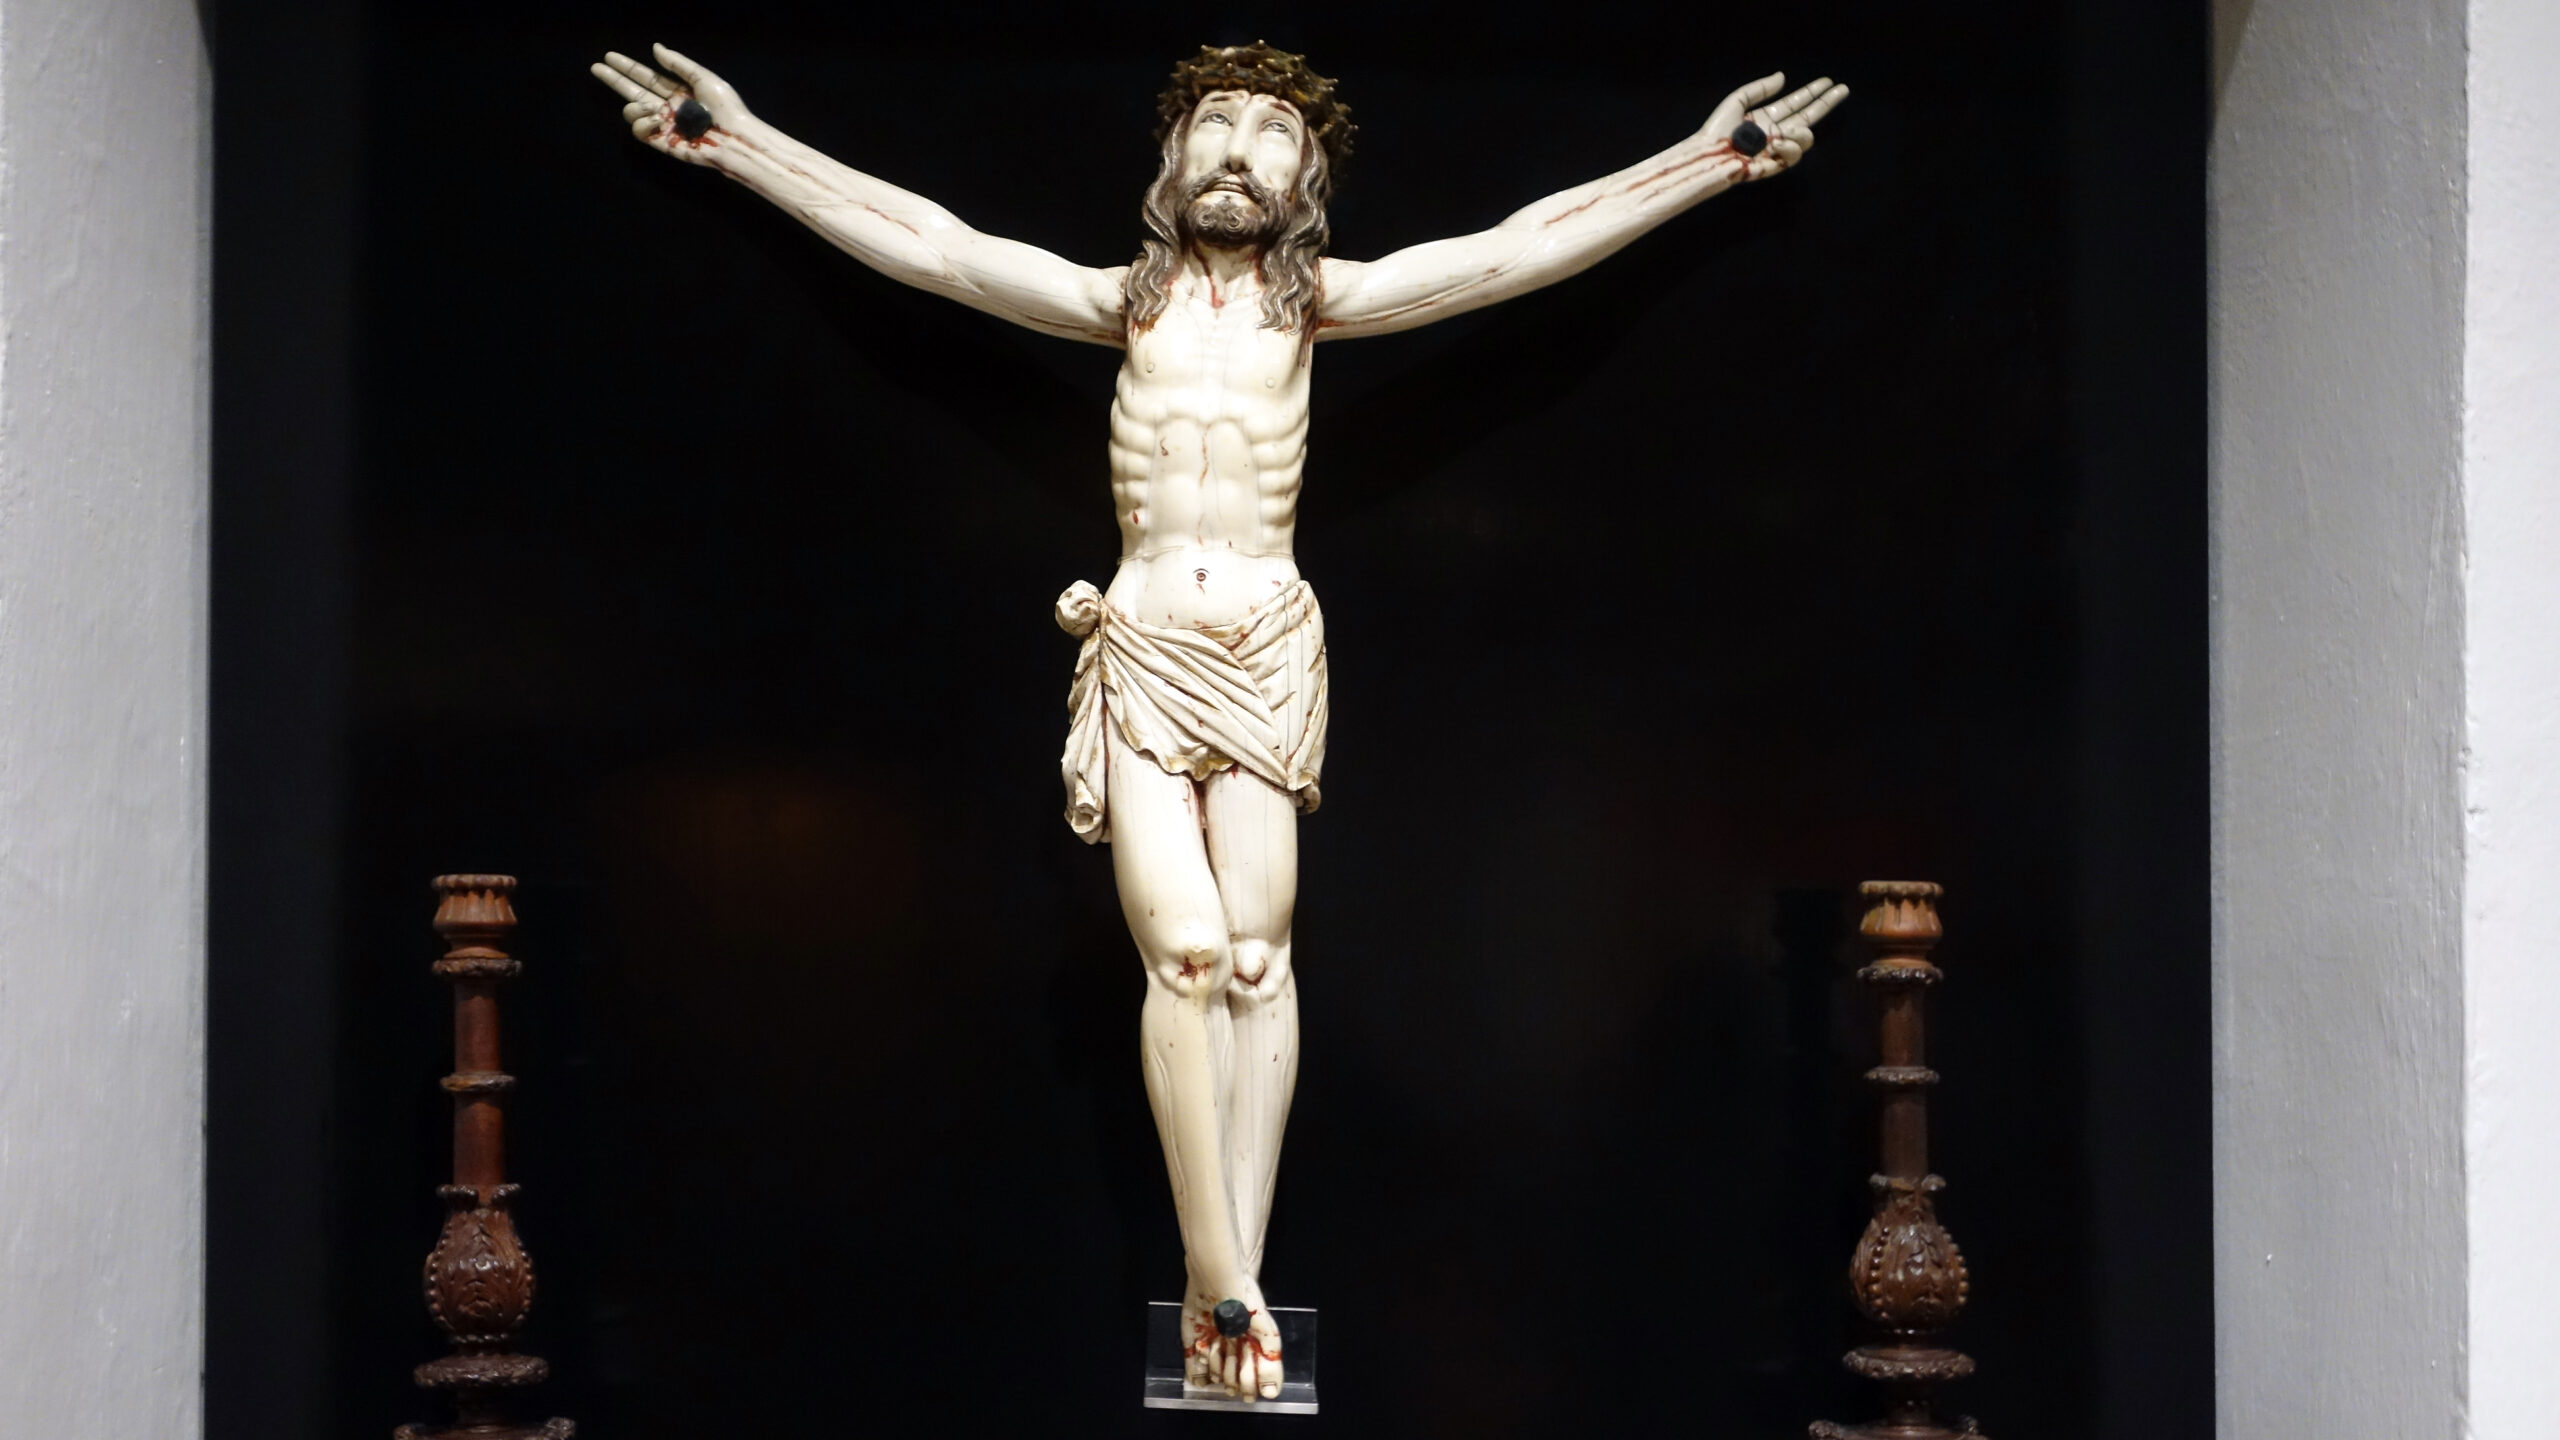 Christ Crucified, 17th century, ivory (Museo Franz Mayer, Mexico City; photo: Steven Zucker, CC BY-NC-SA 2.0)